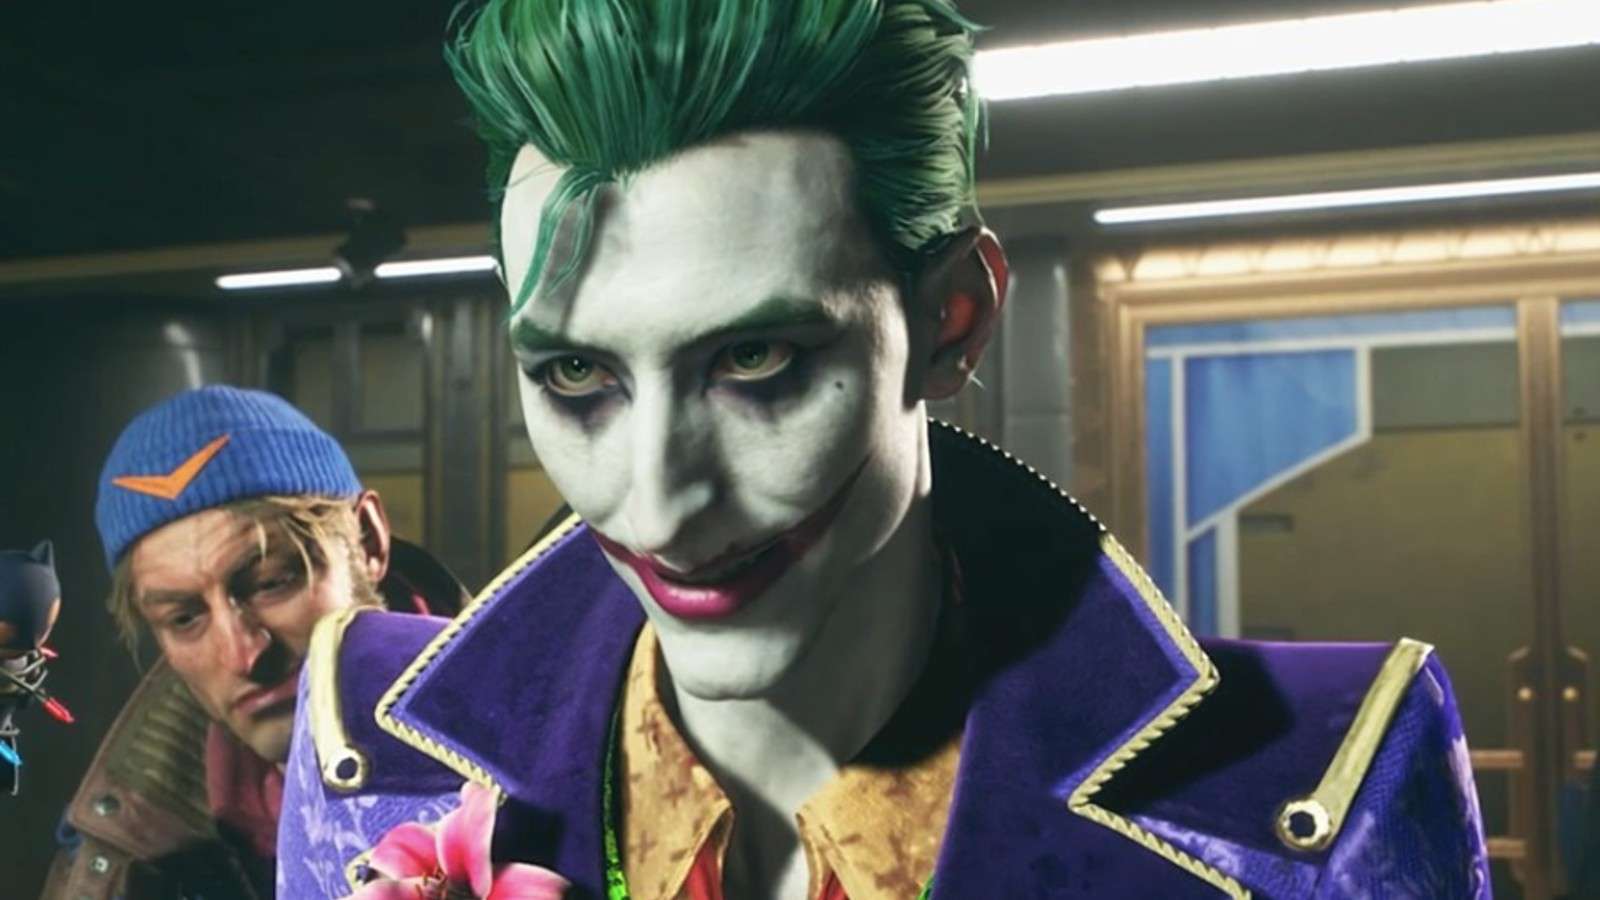 An image of The Joker in Suicide Squad: Kill the Justice League.